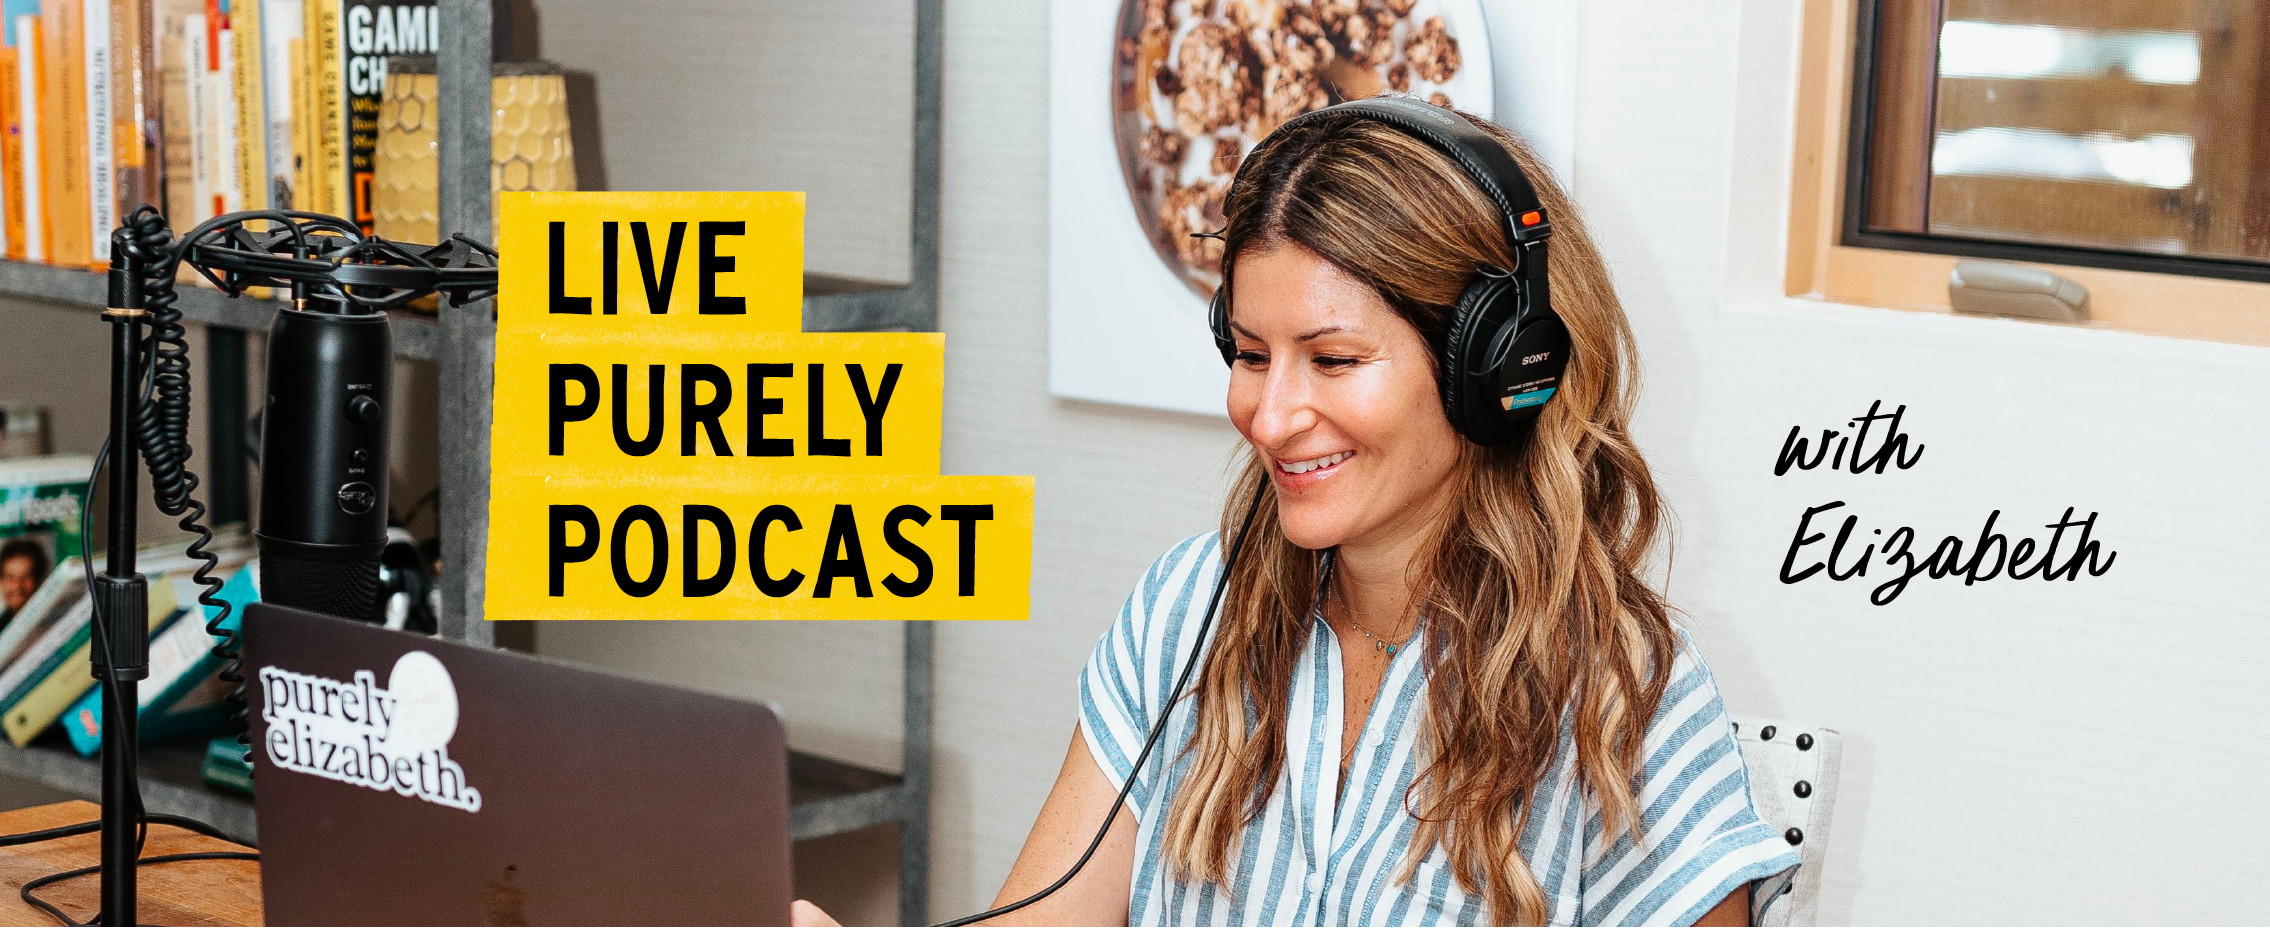 Your Mama's Kitchen, Podcasts on Audible